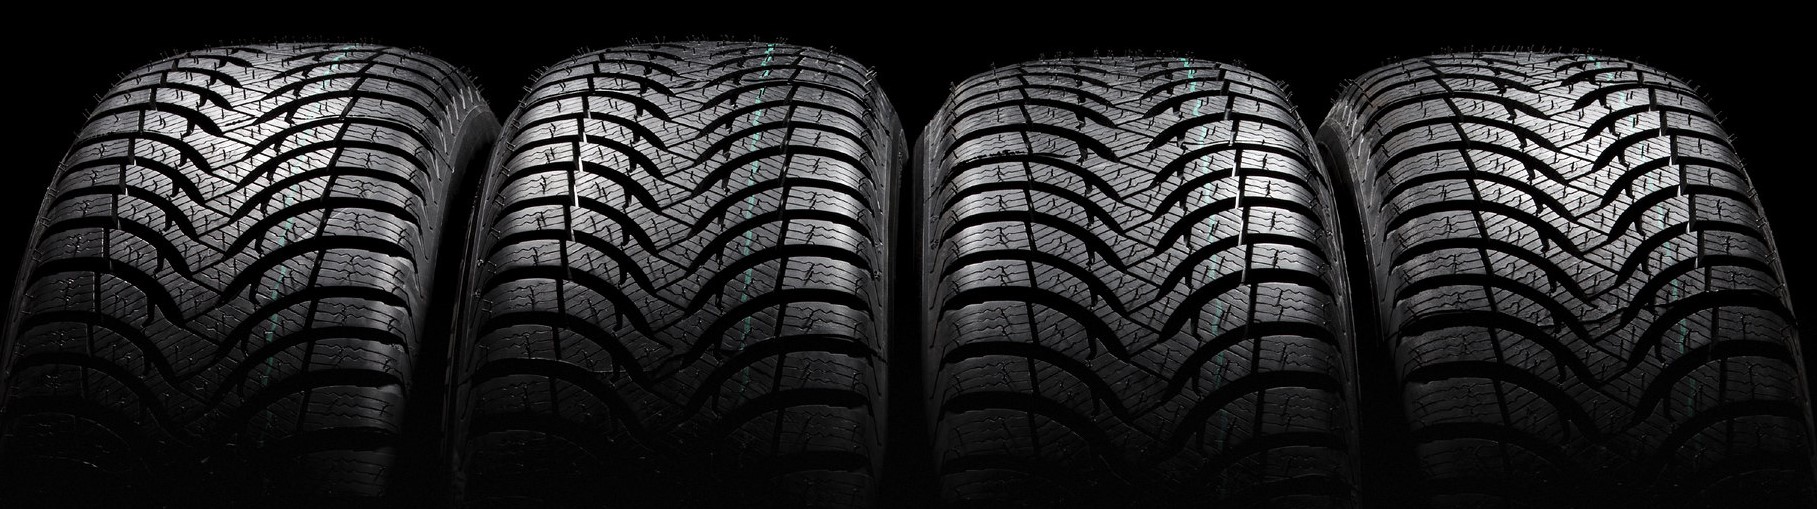 Importance of Tire Care - Toronto, ON